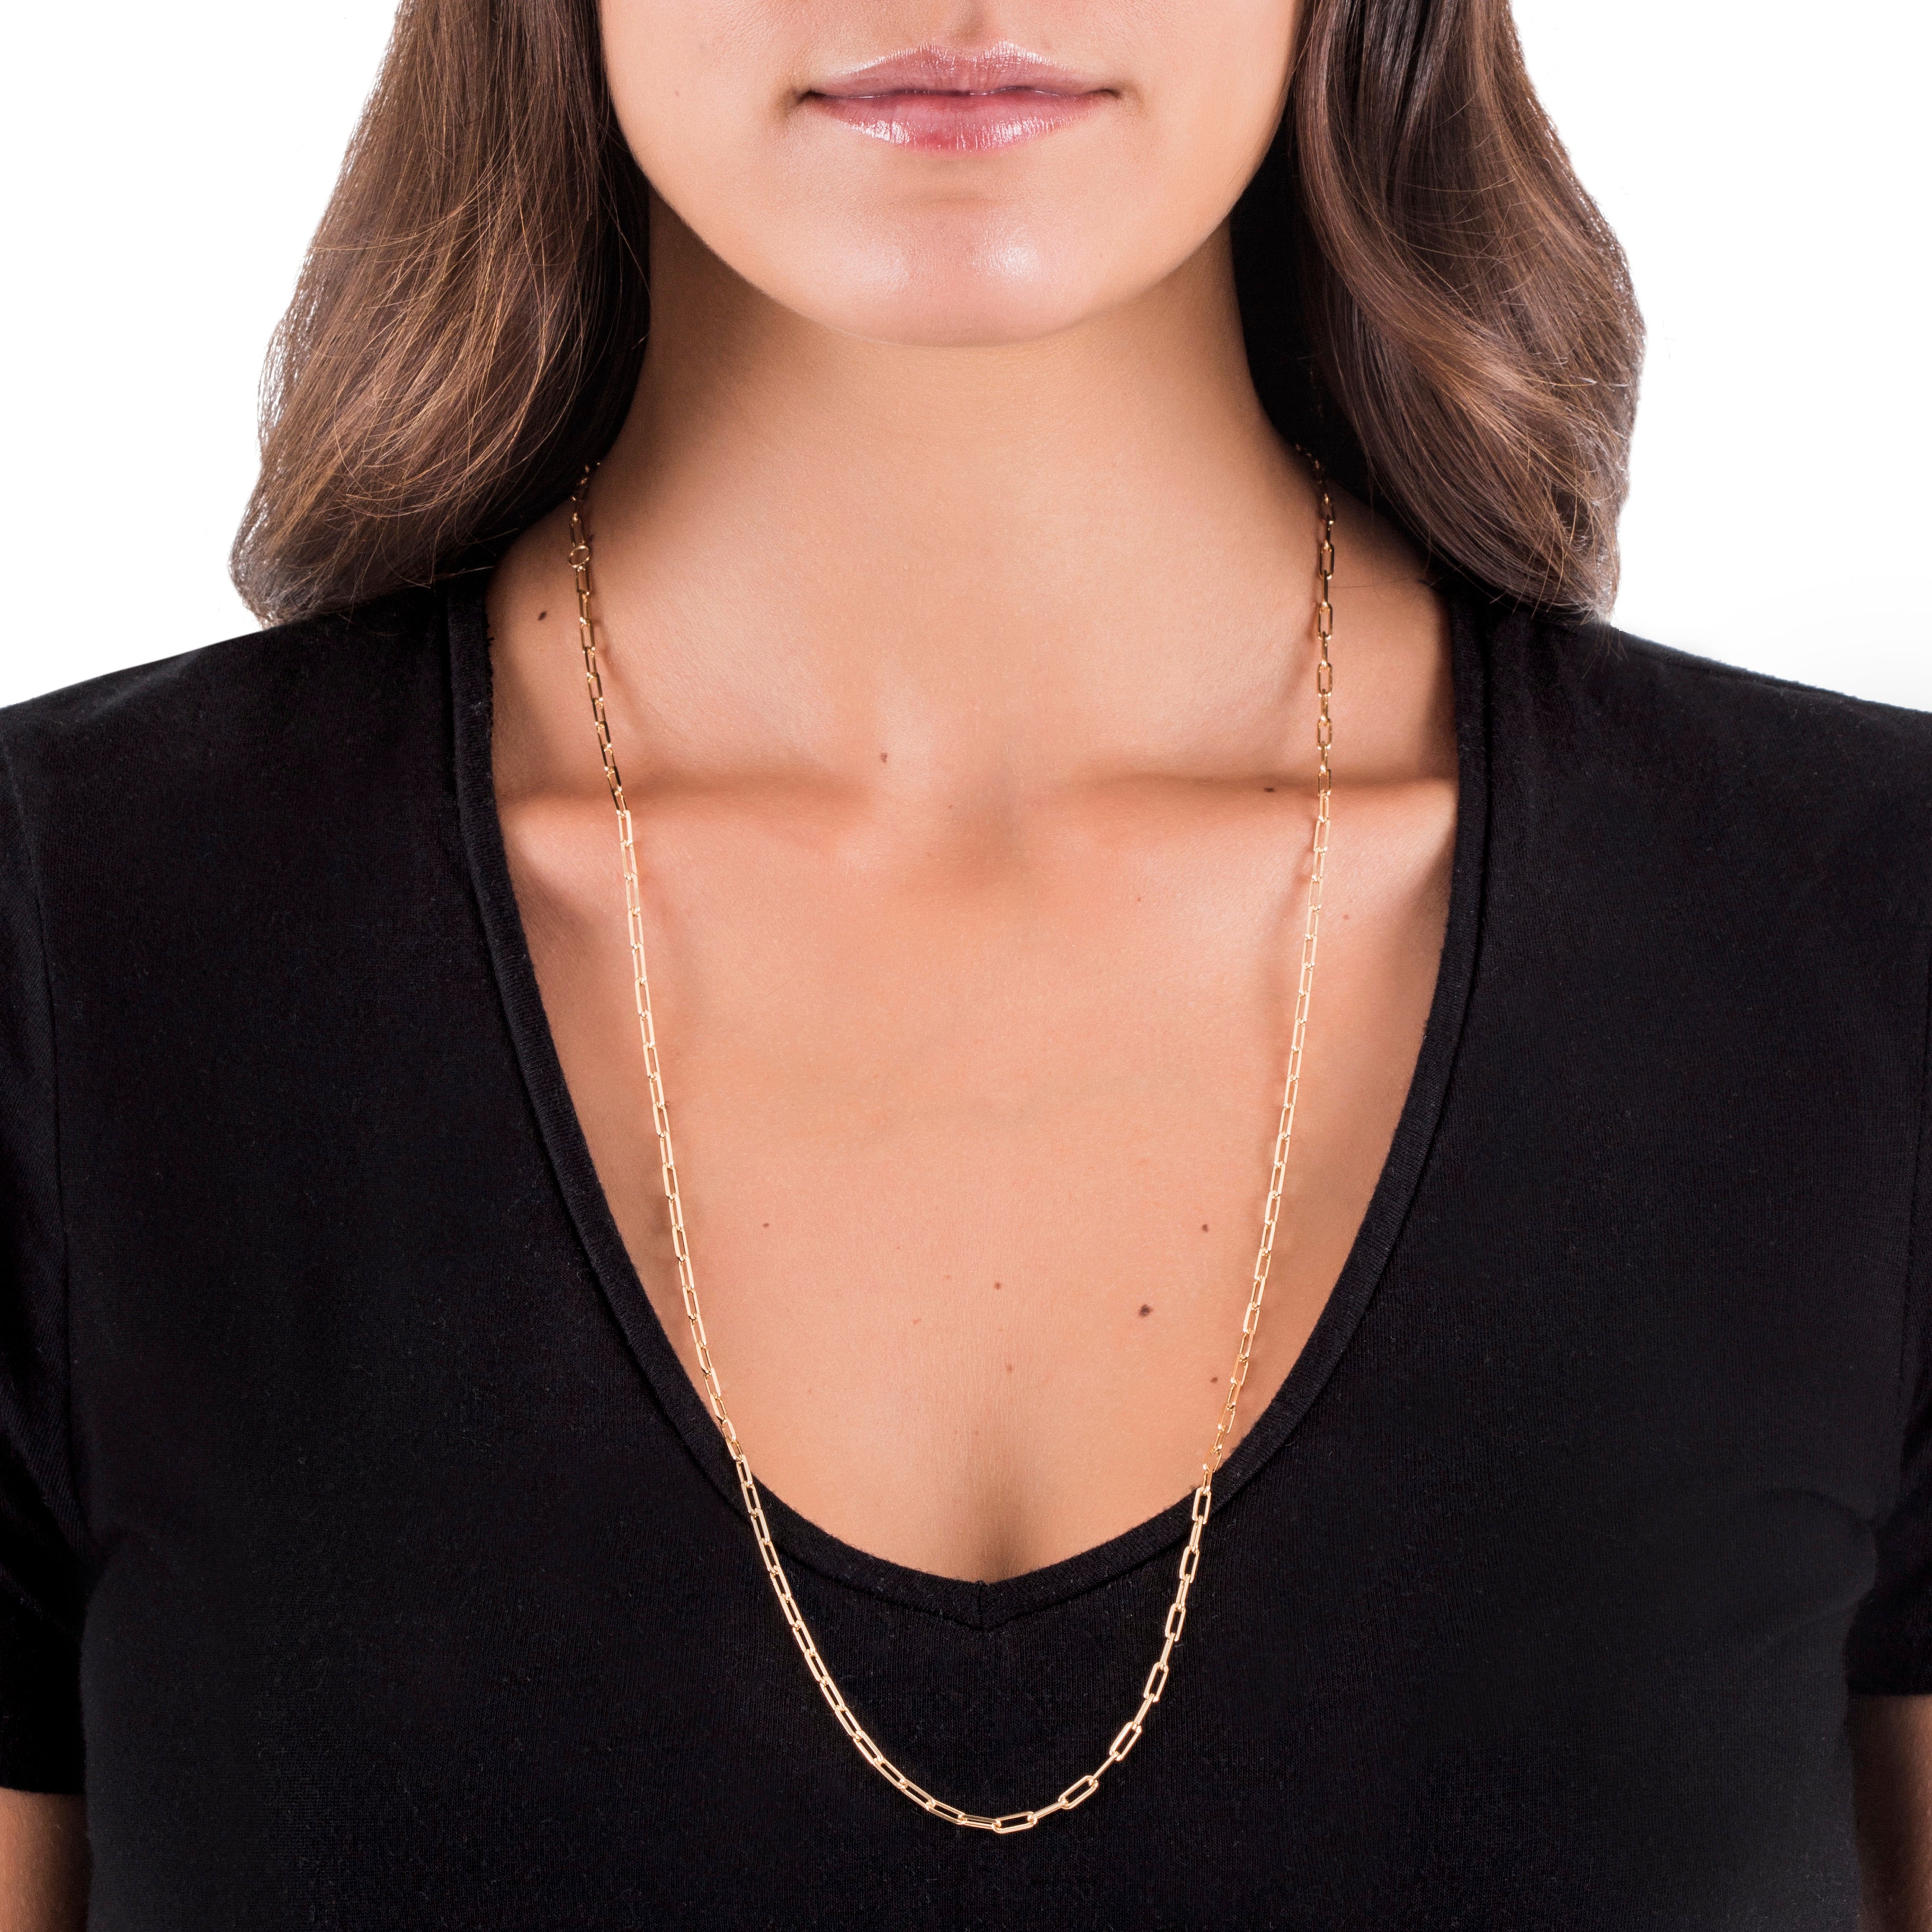 POP THICK LONG CHAIN NECKLACE IN 18K YELLOW GOLD PLATED SILVER